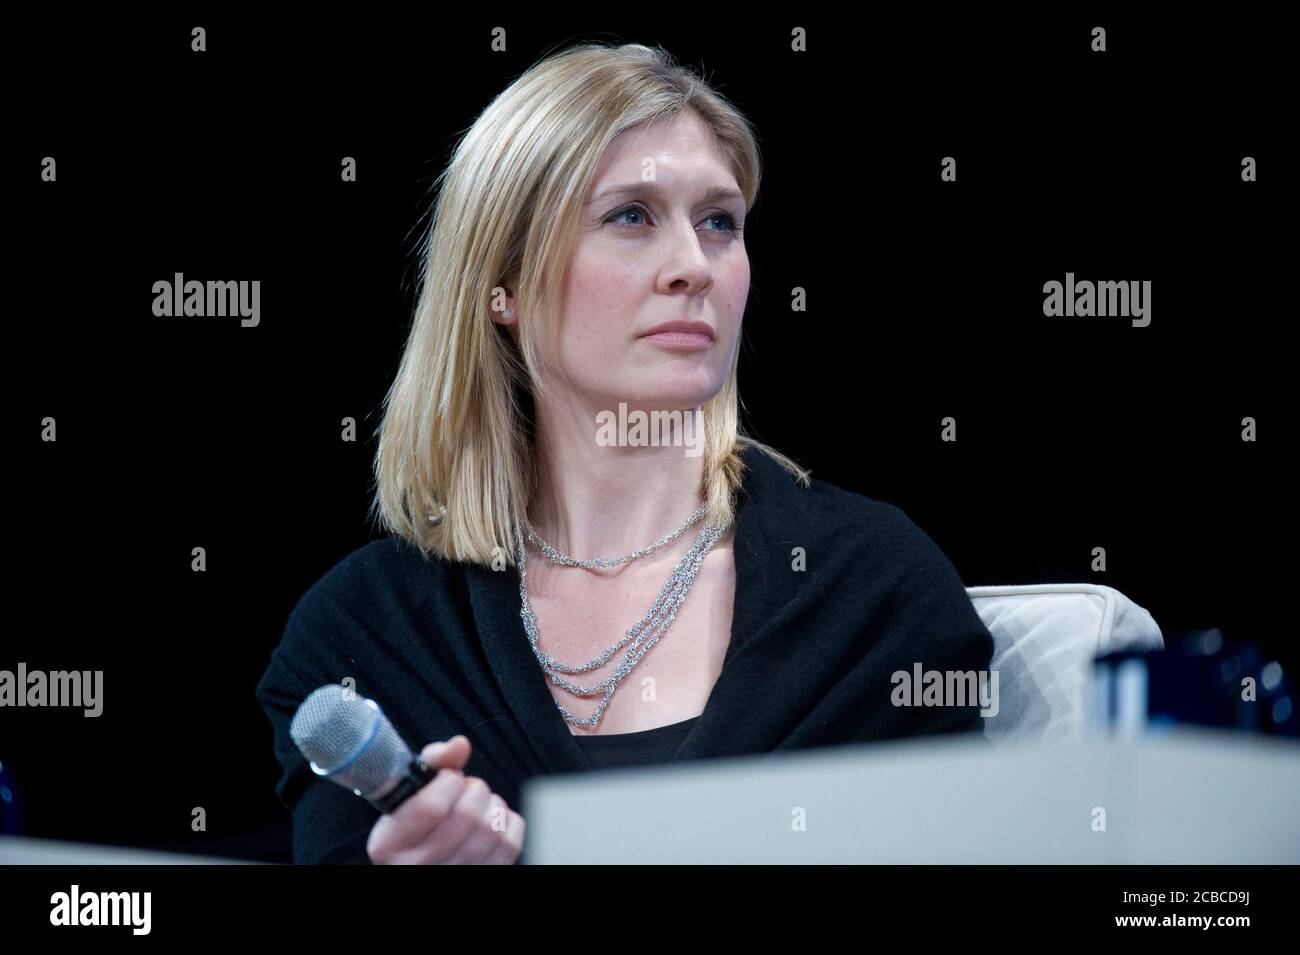 Austin, Texas USA, February 14, 2009: Marie Tillman, widow of Army Ranger and NFL player Pat Tillman who was killed in Afghanistan, participates on a panel at the second-annual Clinton Global Initiative University, a conference bringing together students to take action on global challenges such as poverty, hunger, energy, climate change and global health. The program is founded by former President Bill Clinton.  ©Bob Daemmrich Stock Photo